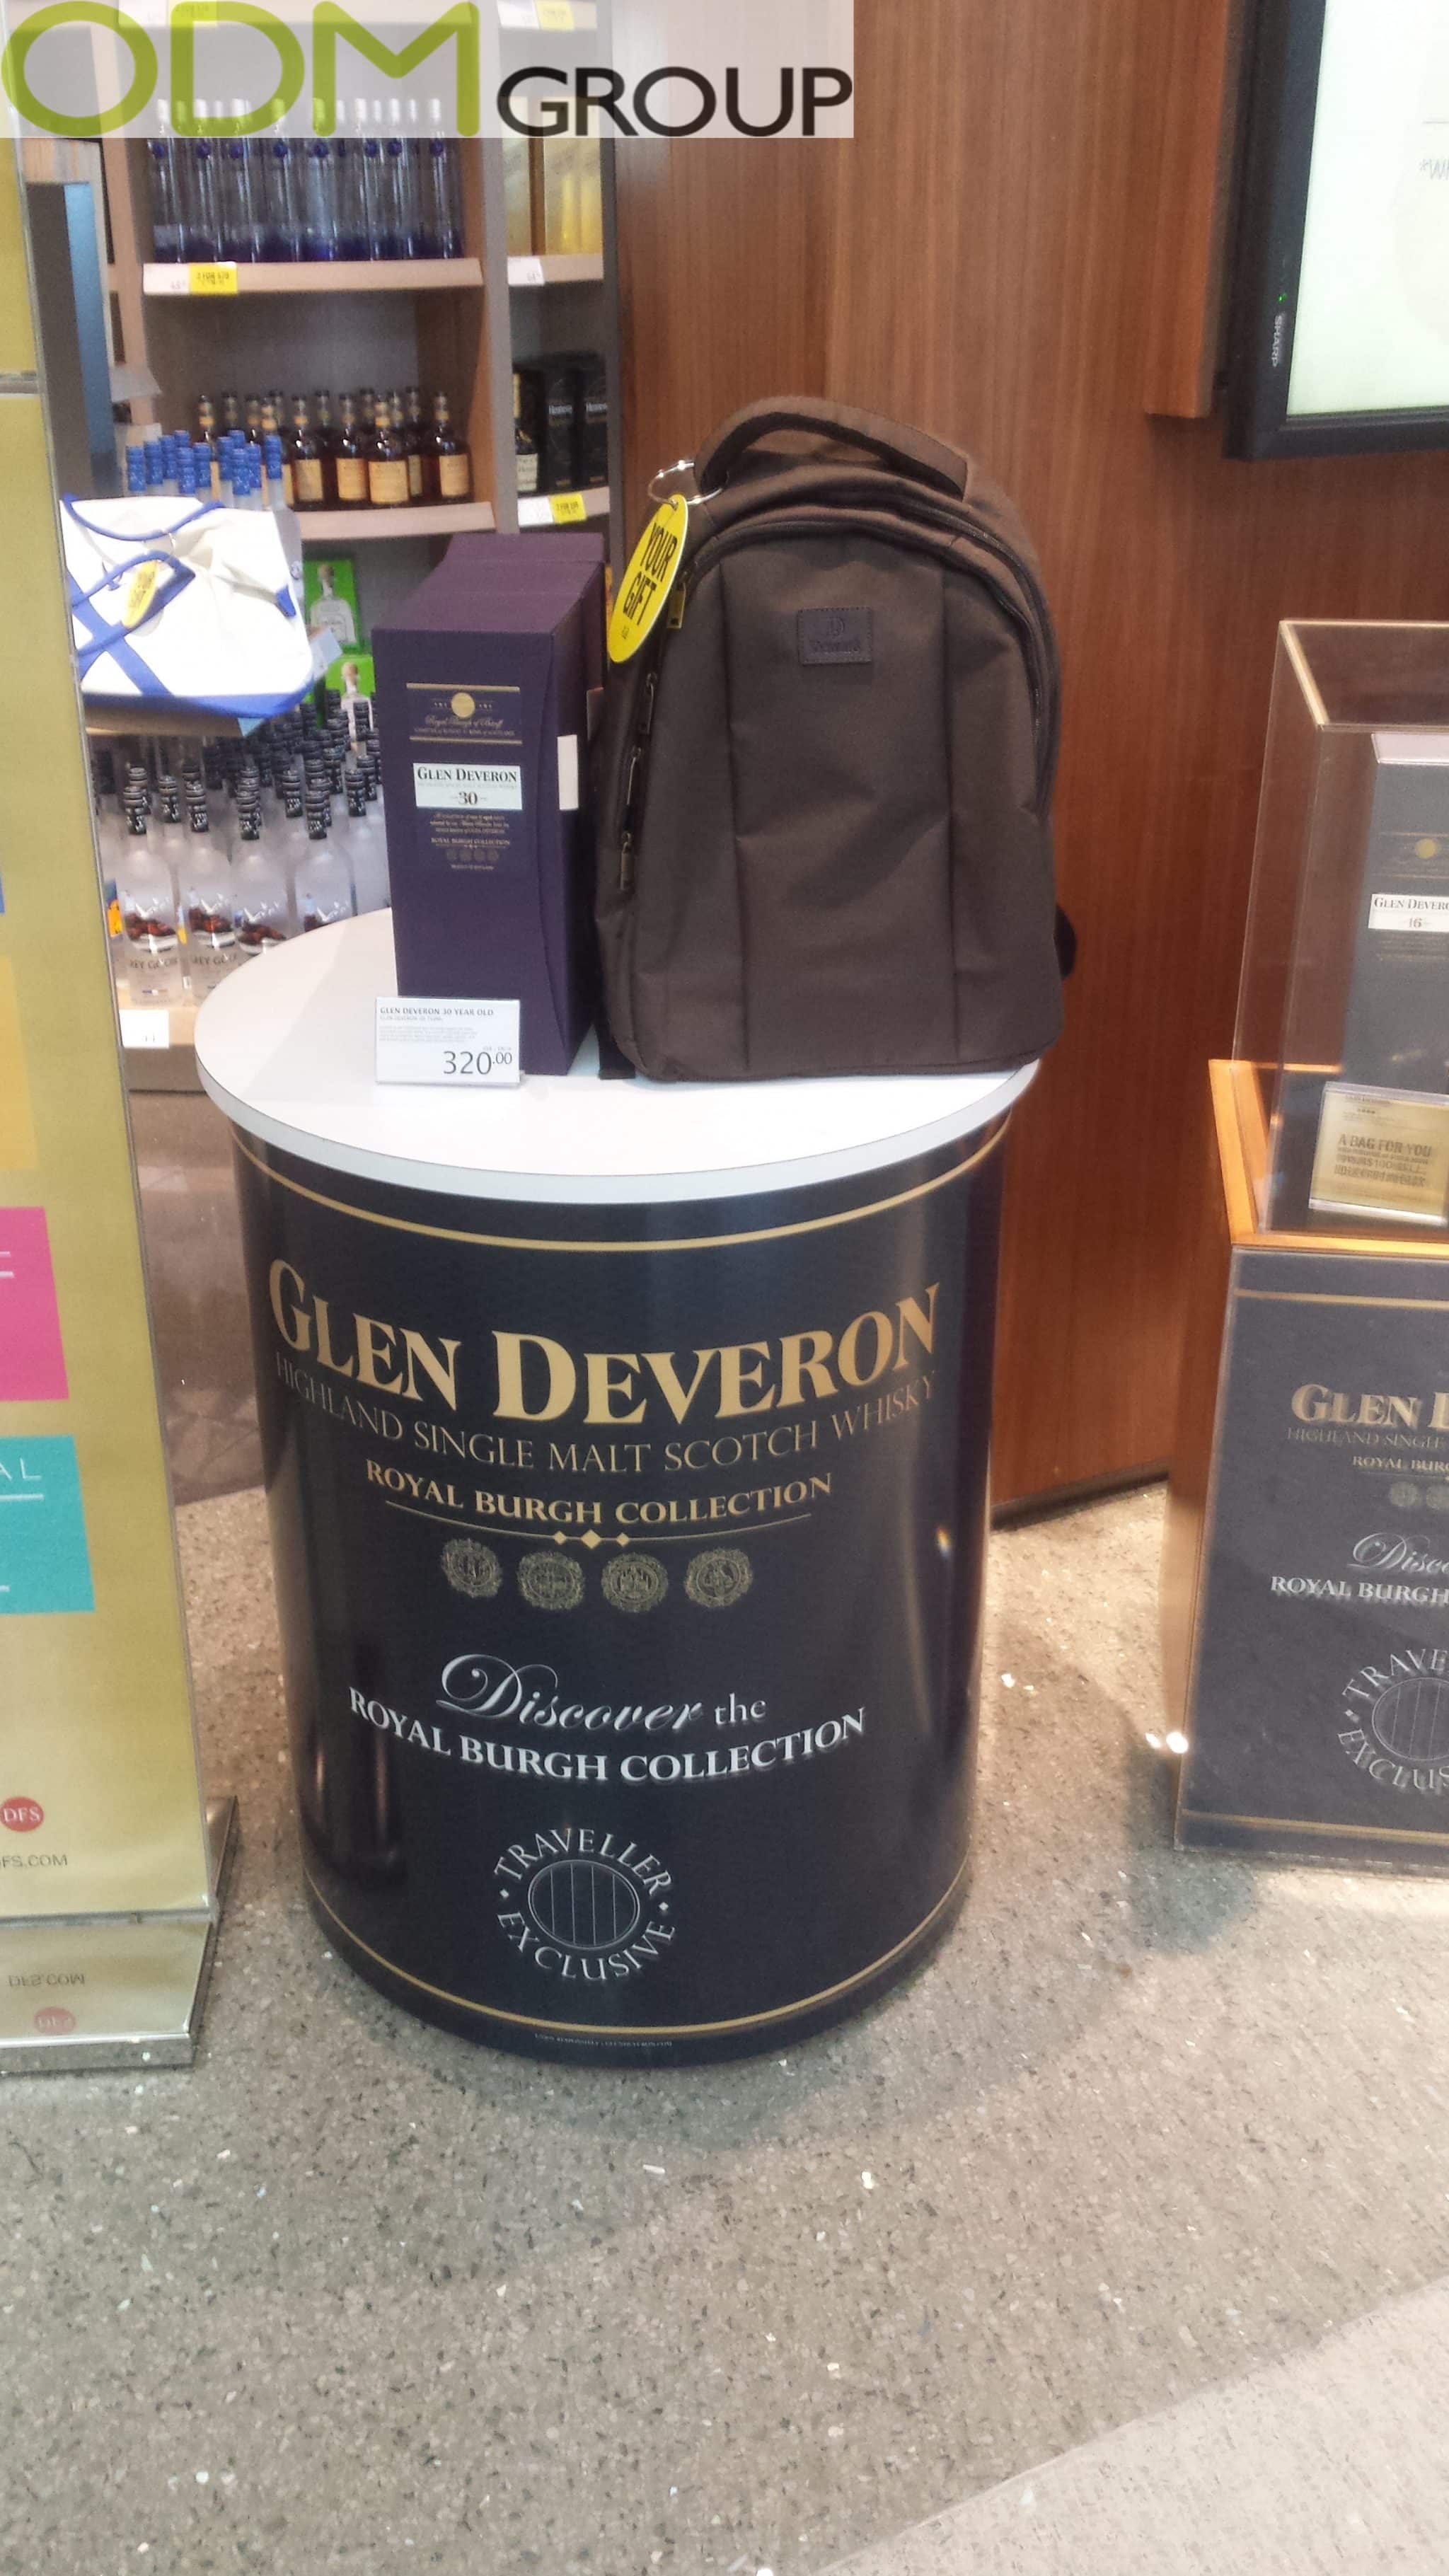 Duty Free Promo Backpack with Glen Deveron Whisky